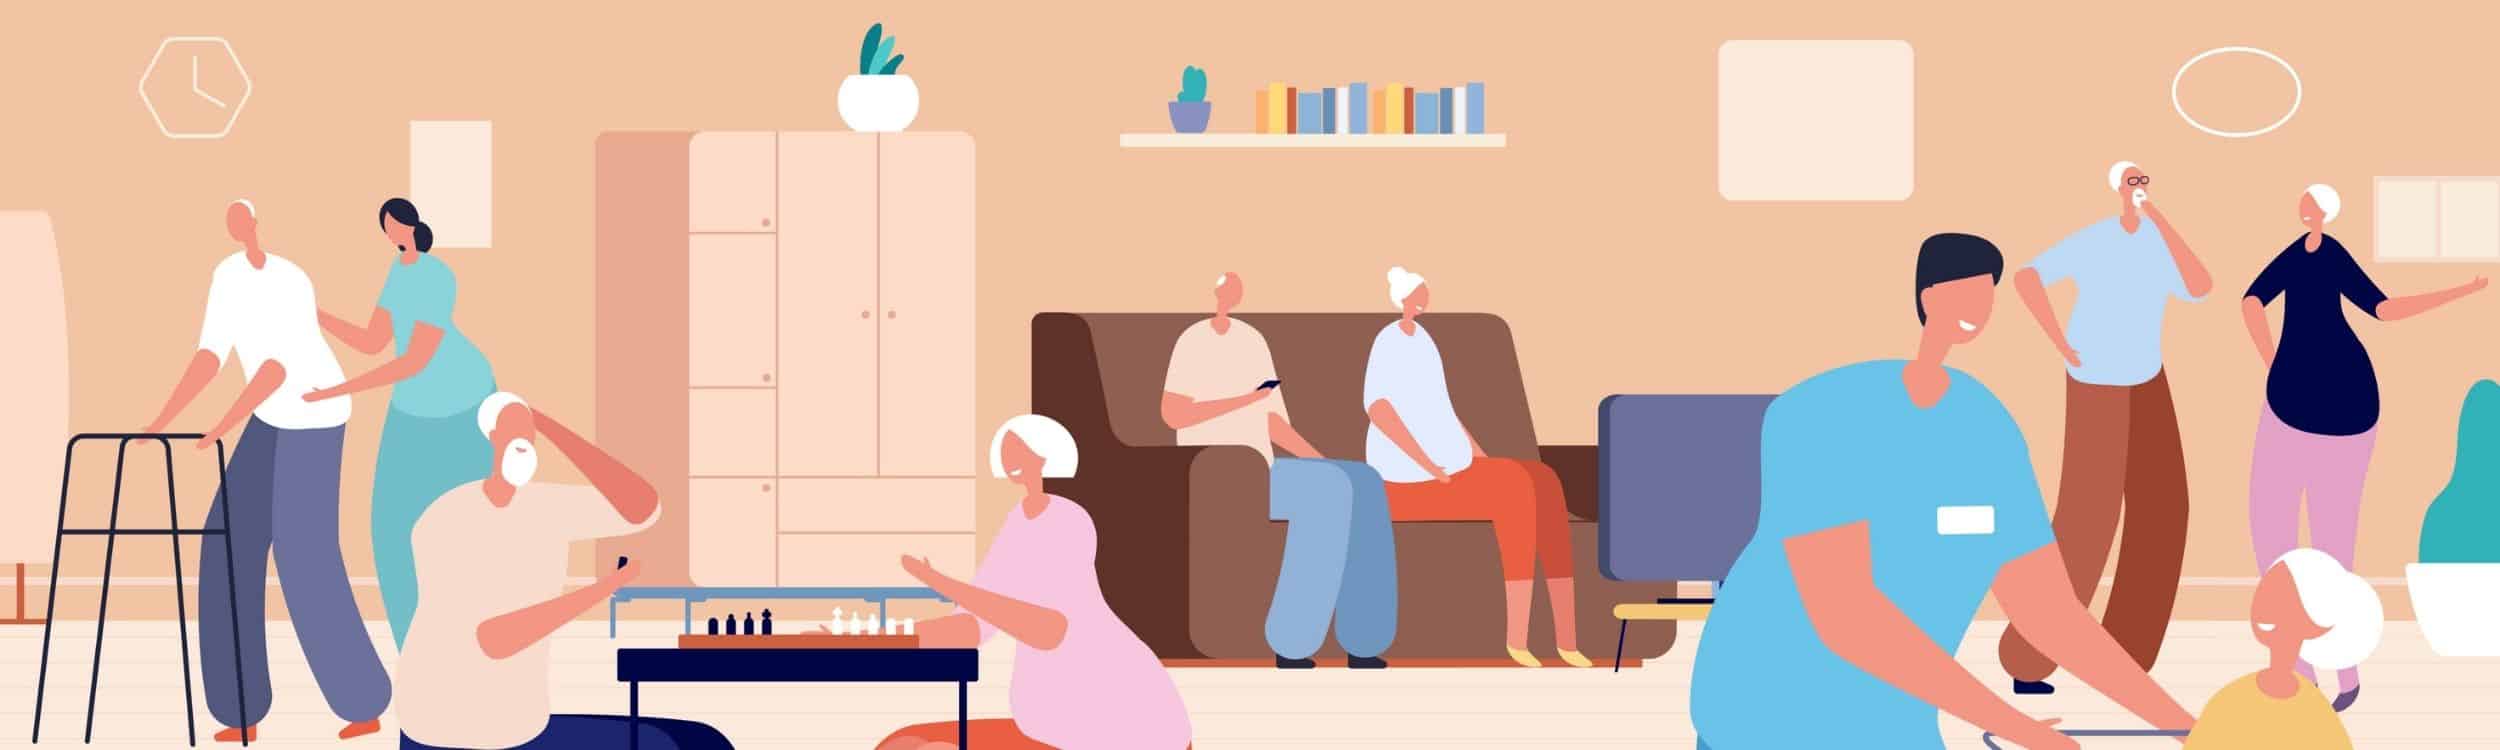 an illustration of a senior living center with people lounging and walking around